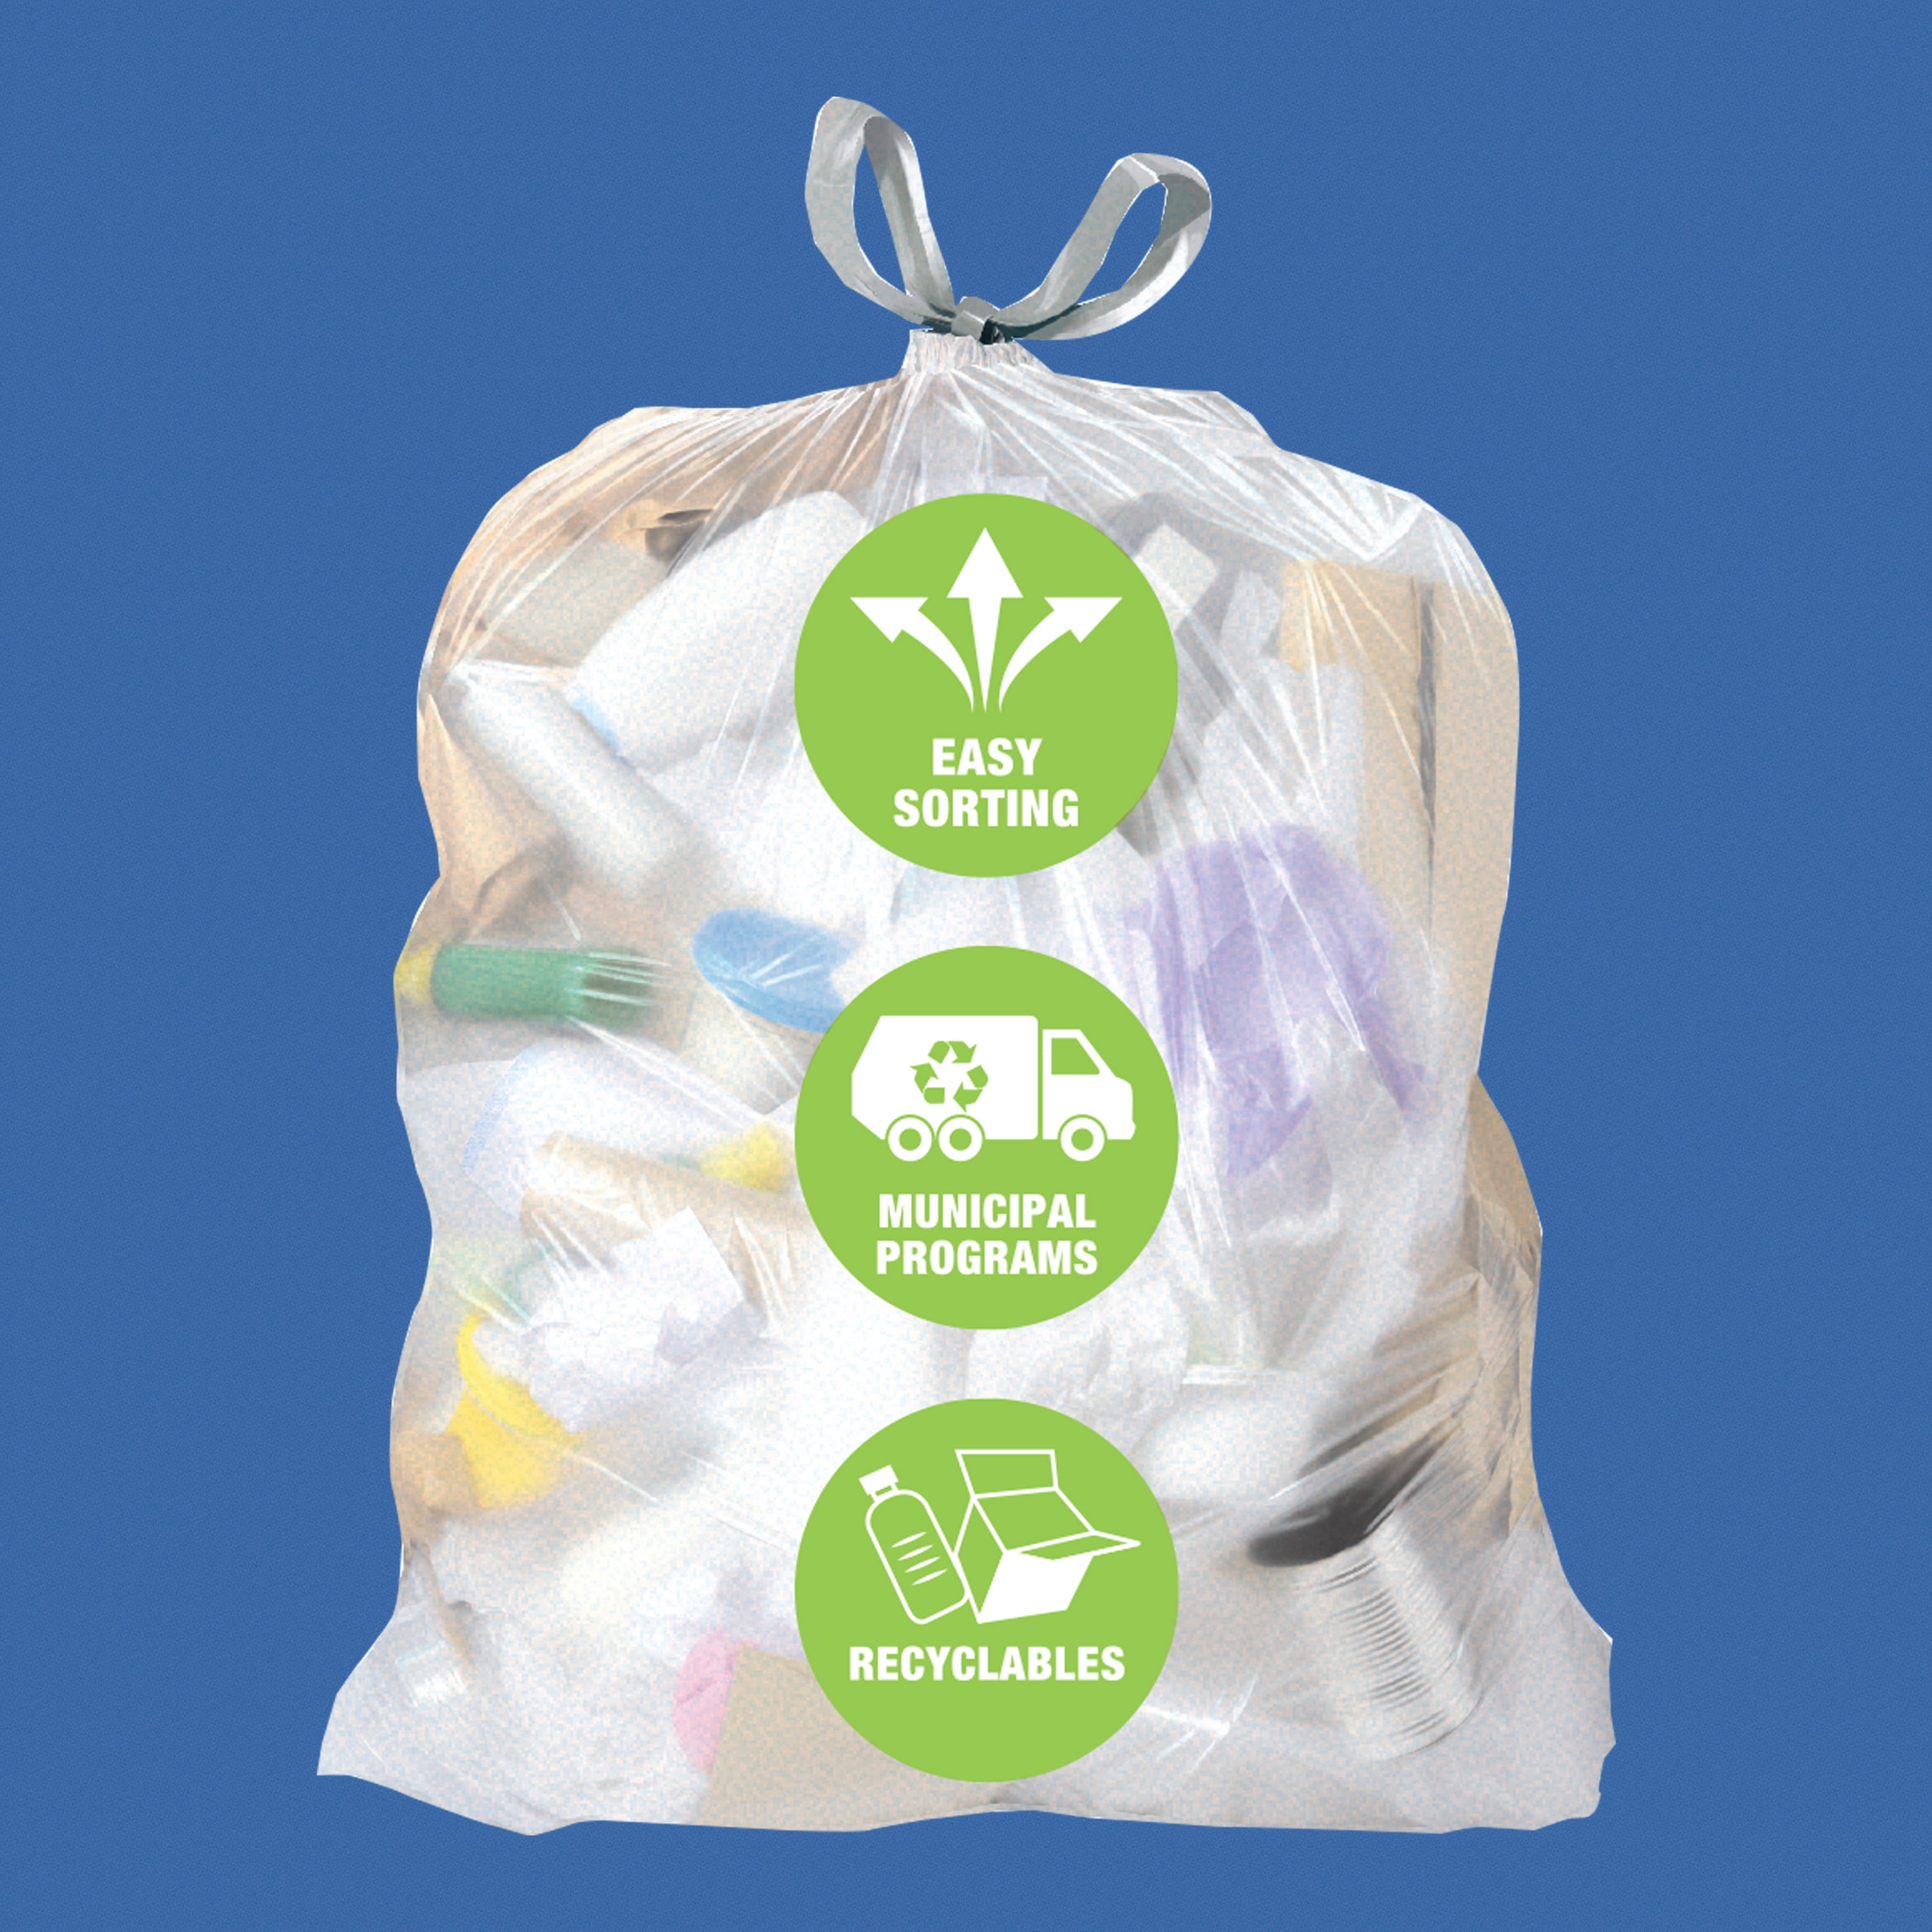 Recycling Bags – Valet Living